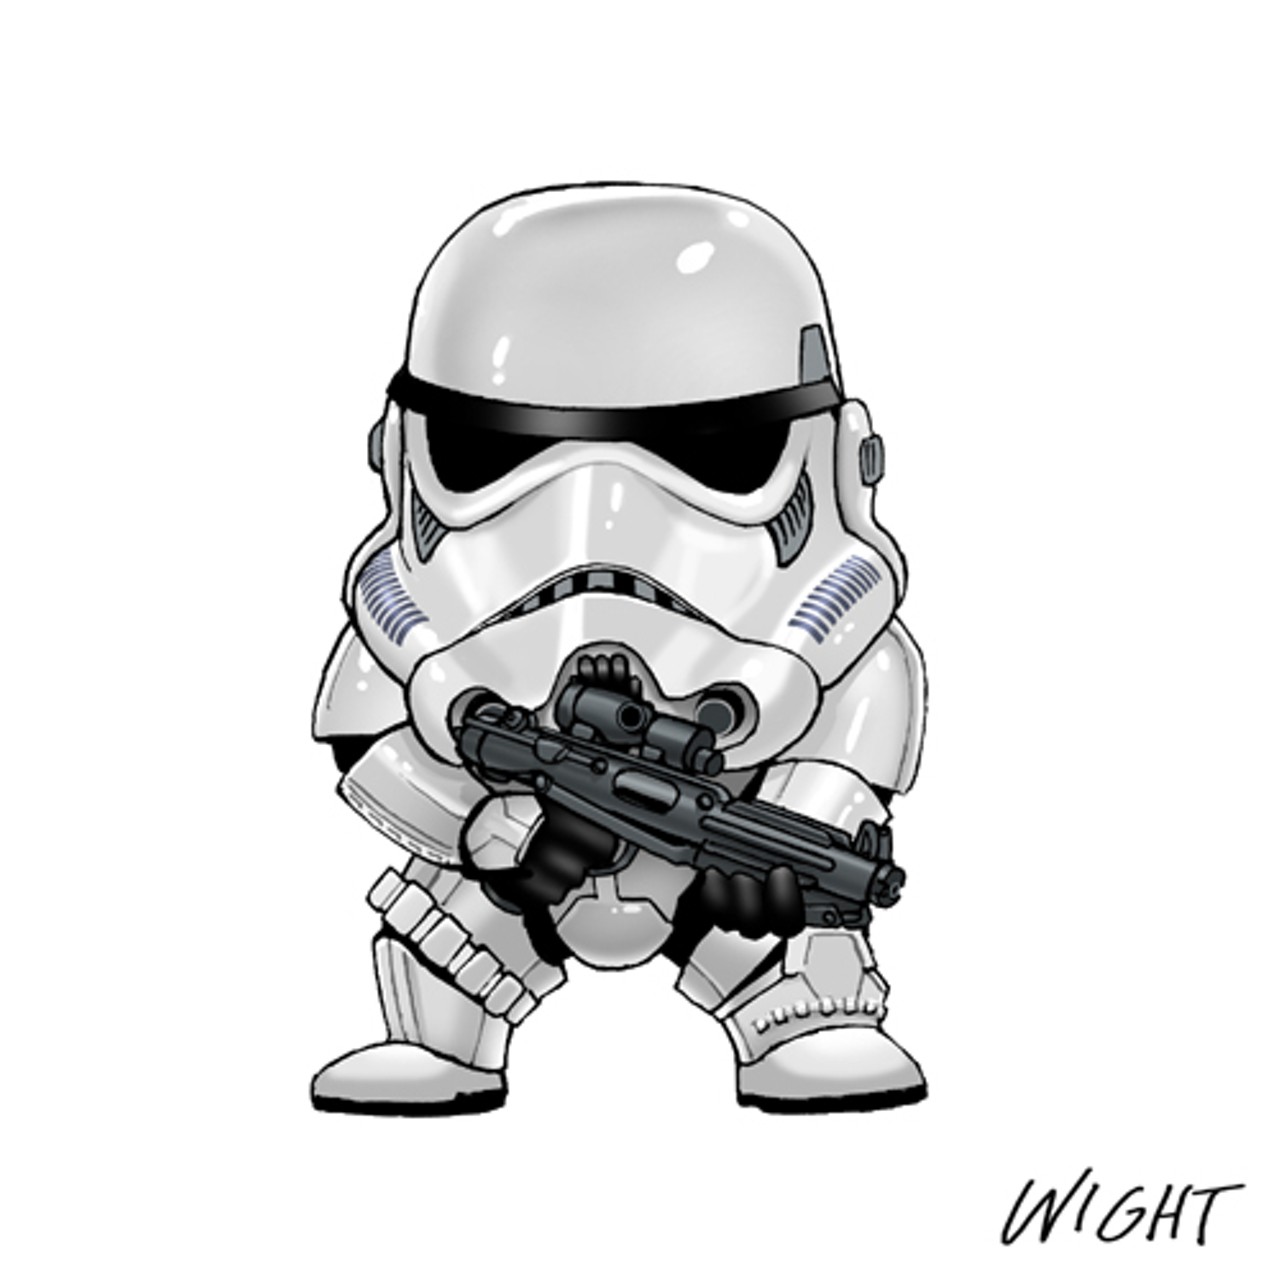 "S Is For Stormtrooper"